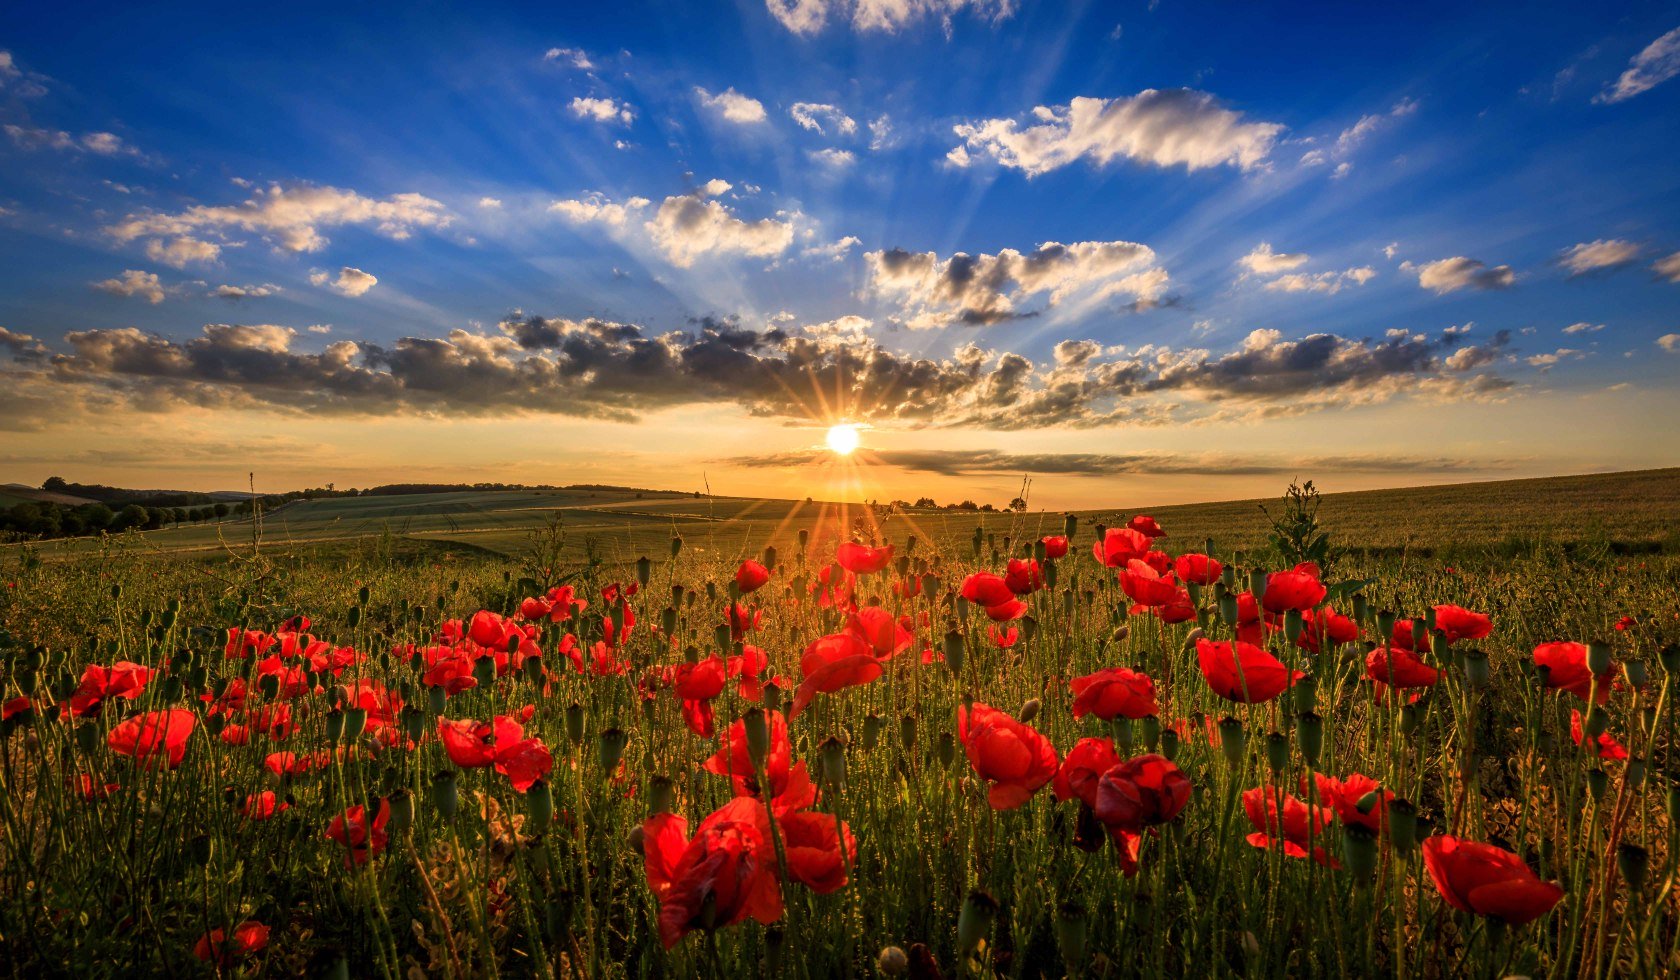 Low sun over poppies and cereal fields, © TMN / Lars Gerhardts